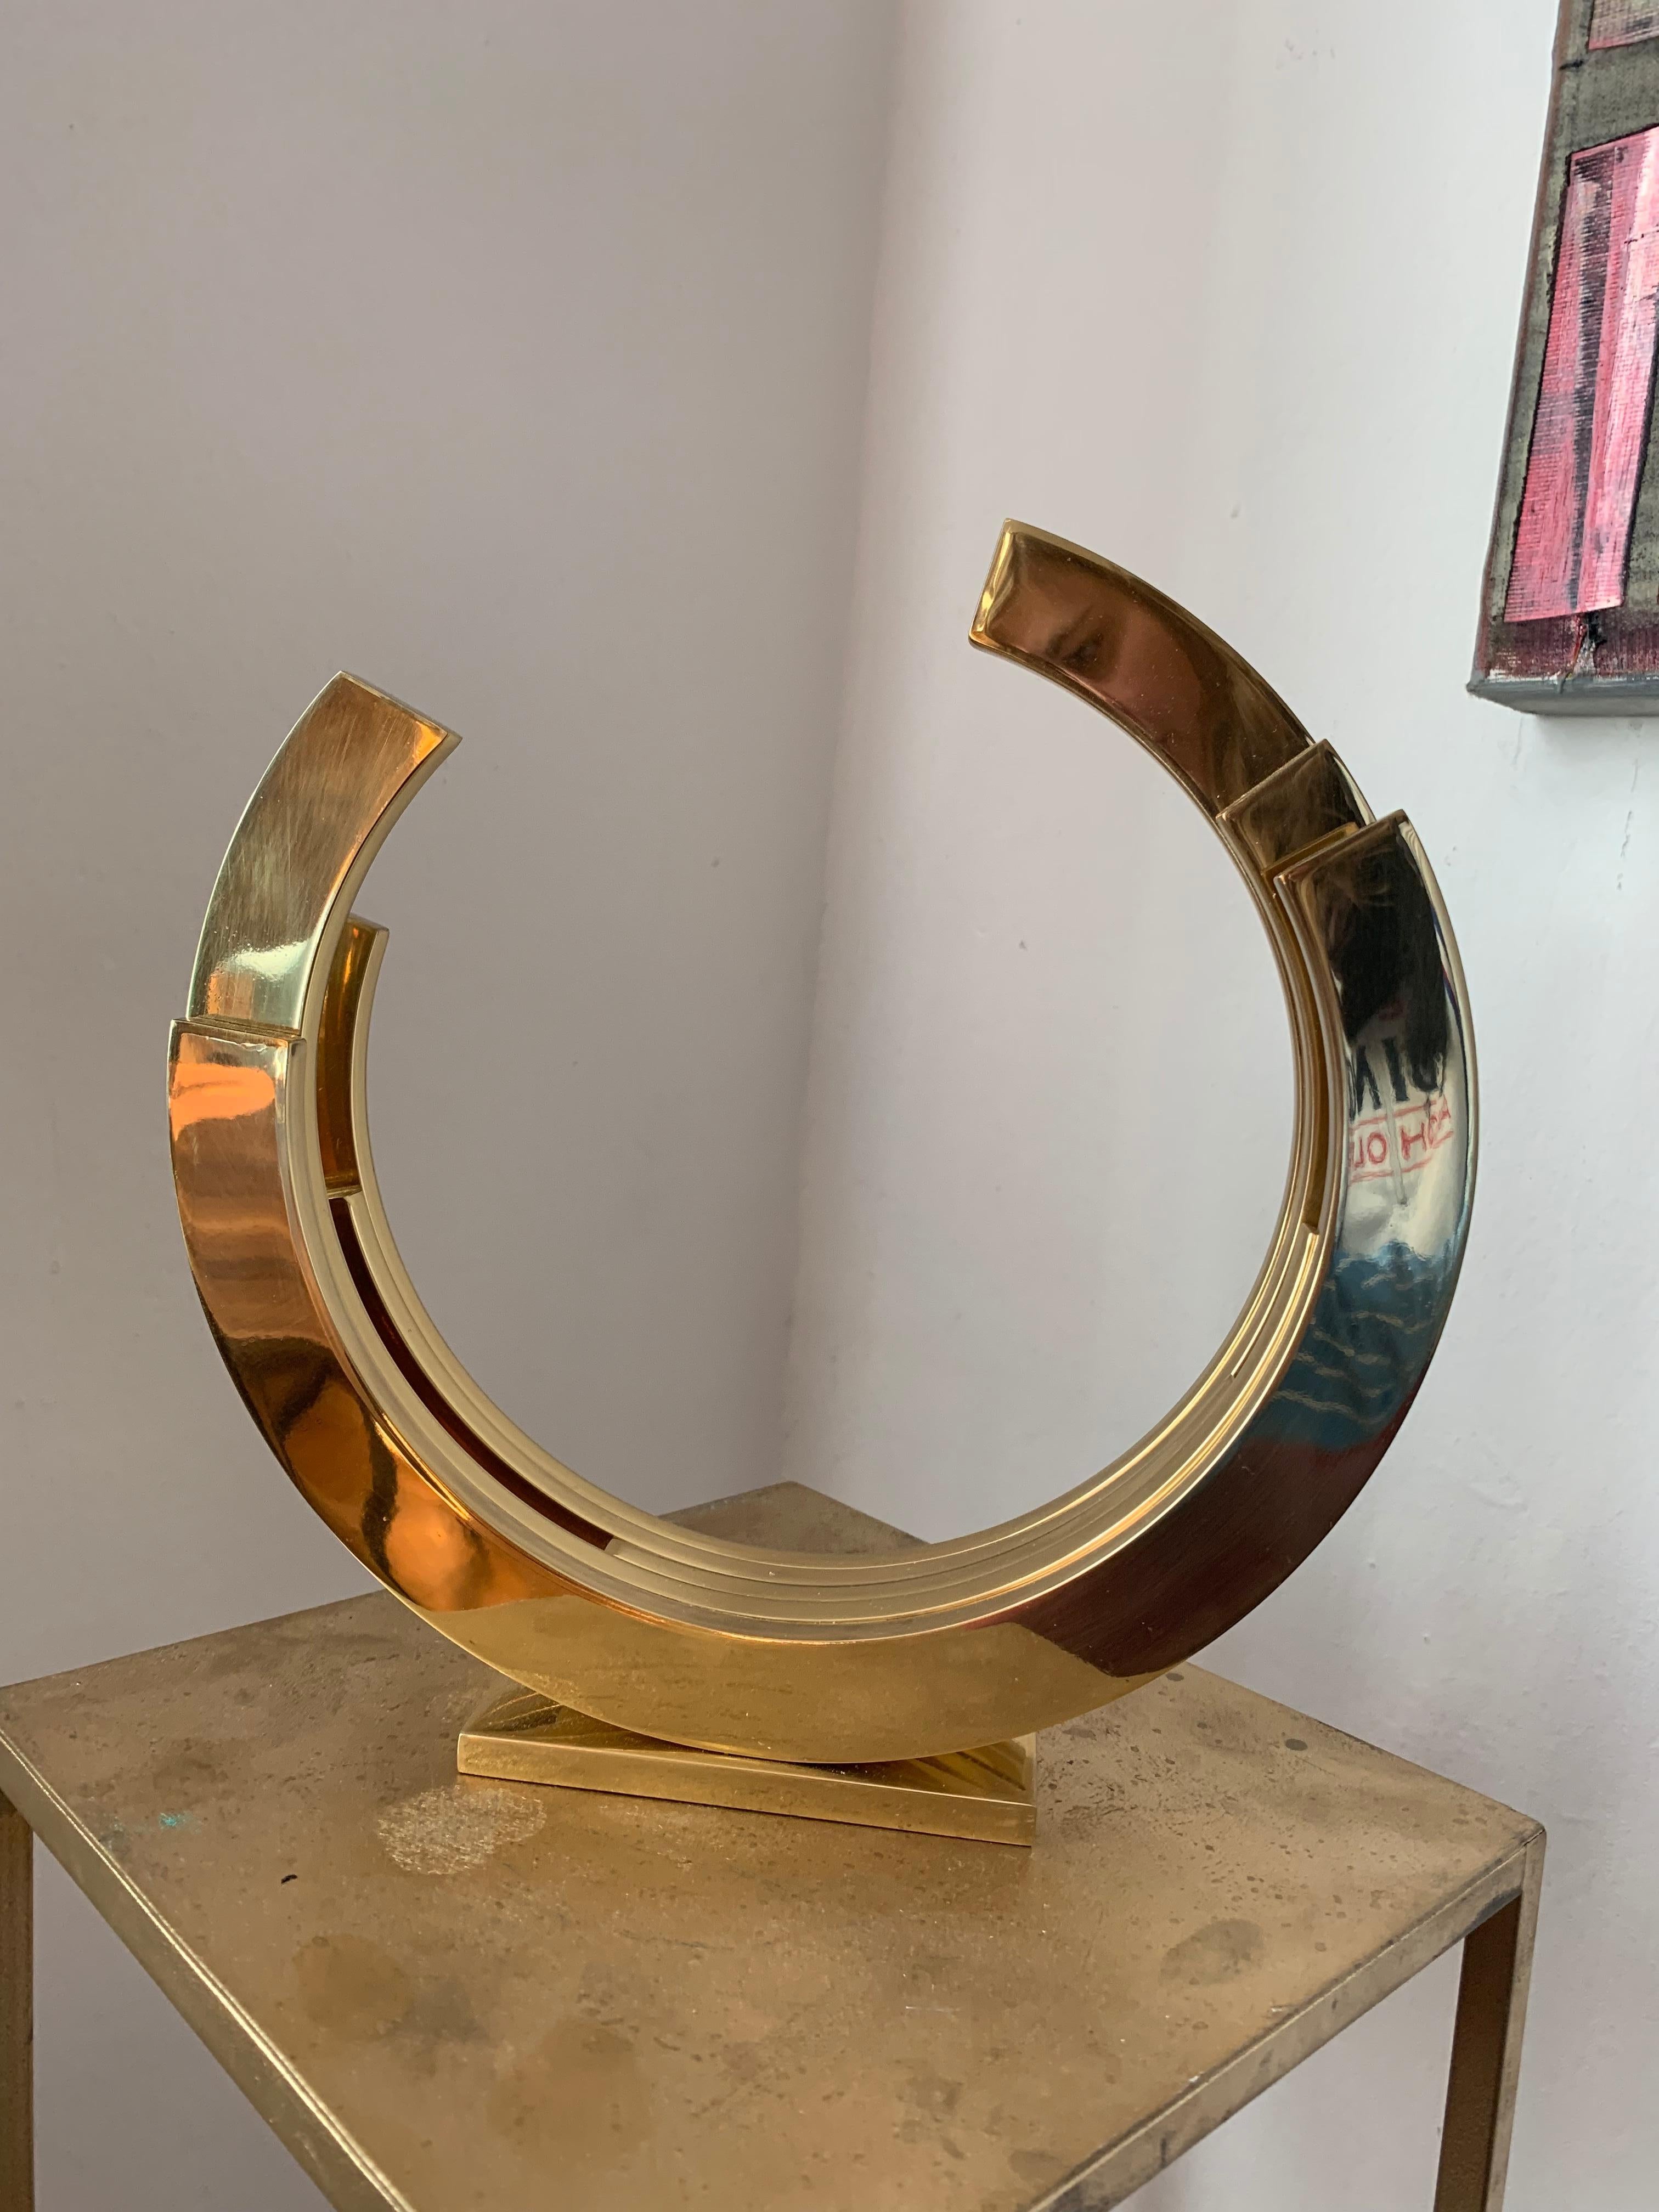 Contemporary Minimal Gold Brass sculpture, gilded and then lacquered to keep its shiny surface.
Limited edition of 10
Kuno Vollet is a sculptor working with different materials such as clay, bronze and brass. 
Other works are not cast but heated and